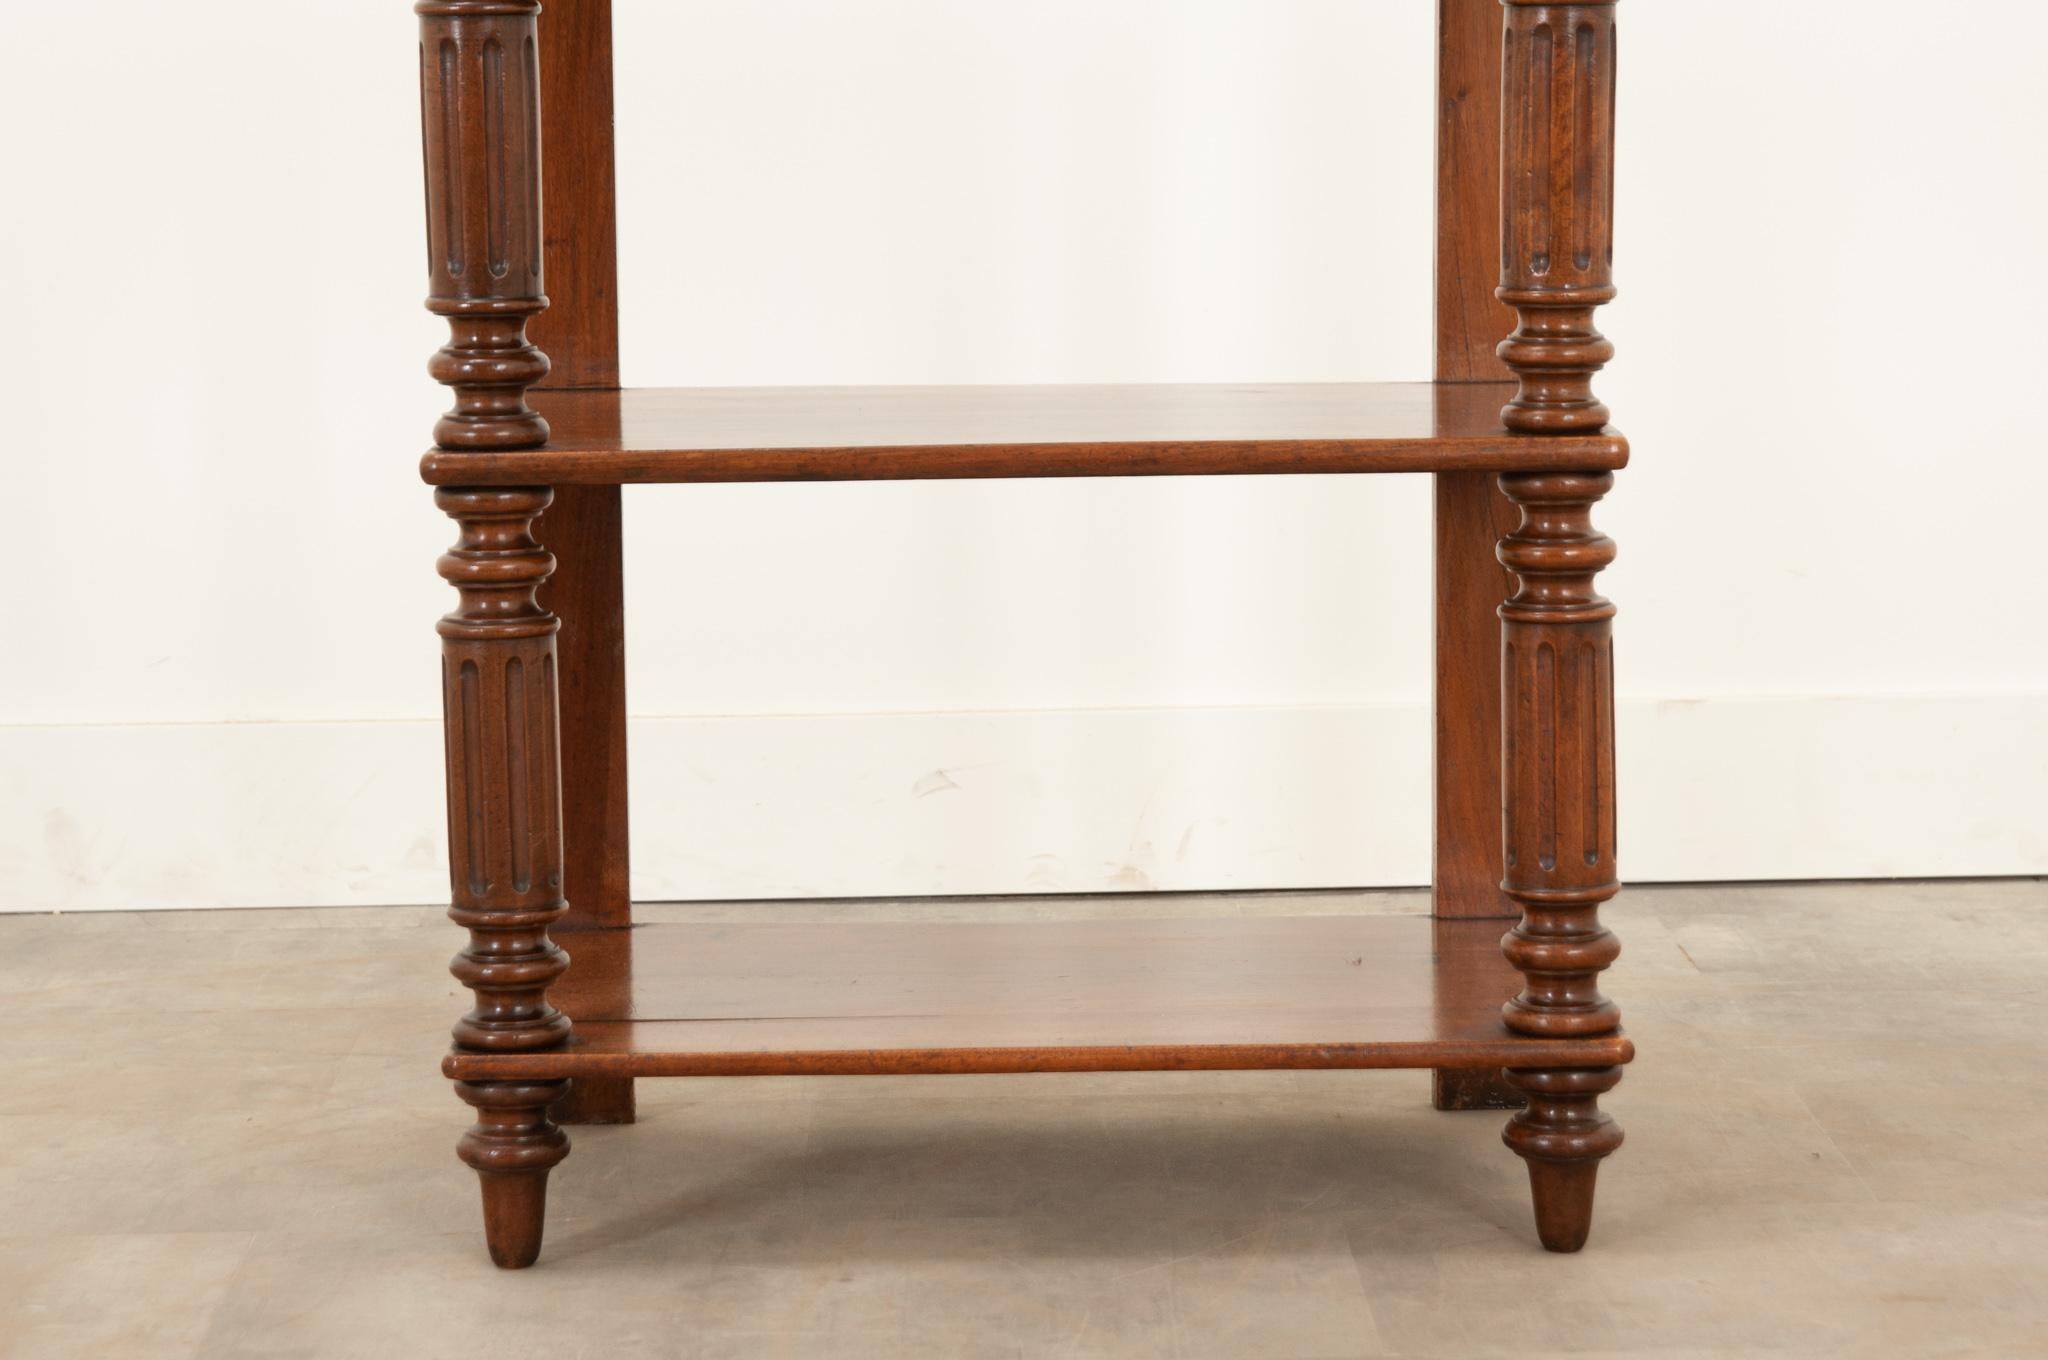 Patinated English Solid Walnut Etagere For Sale